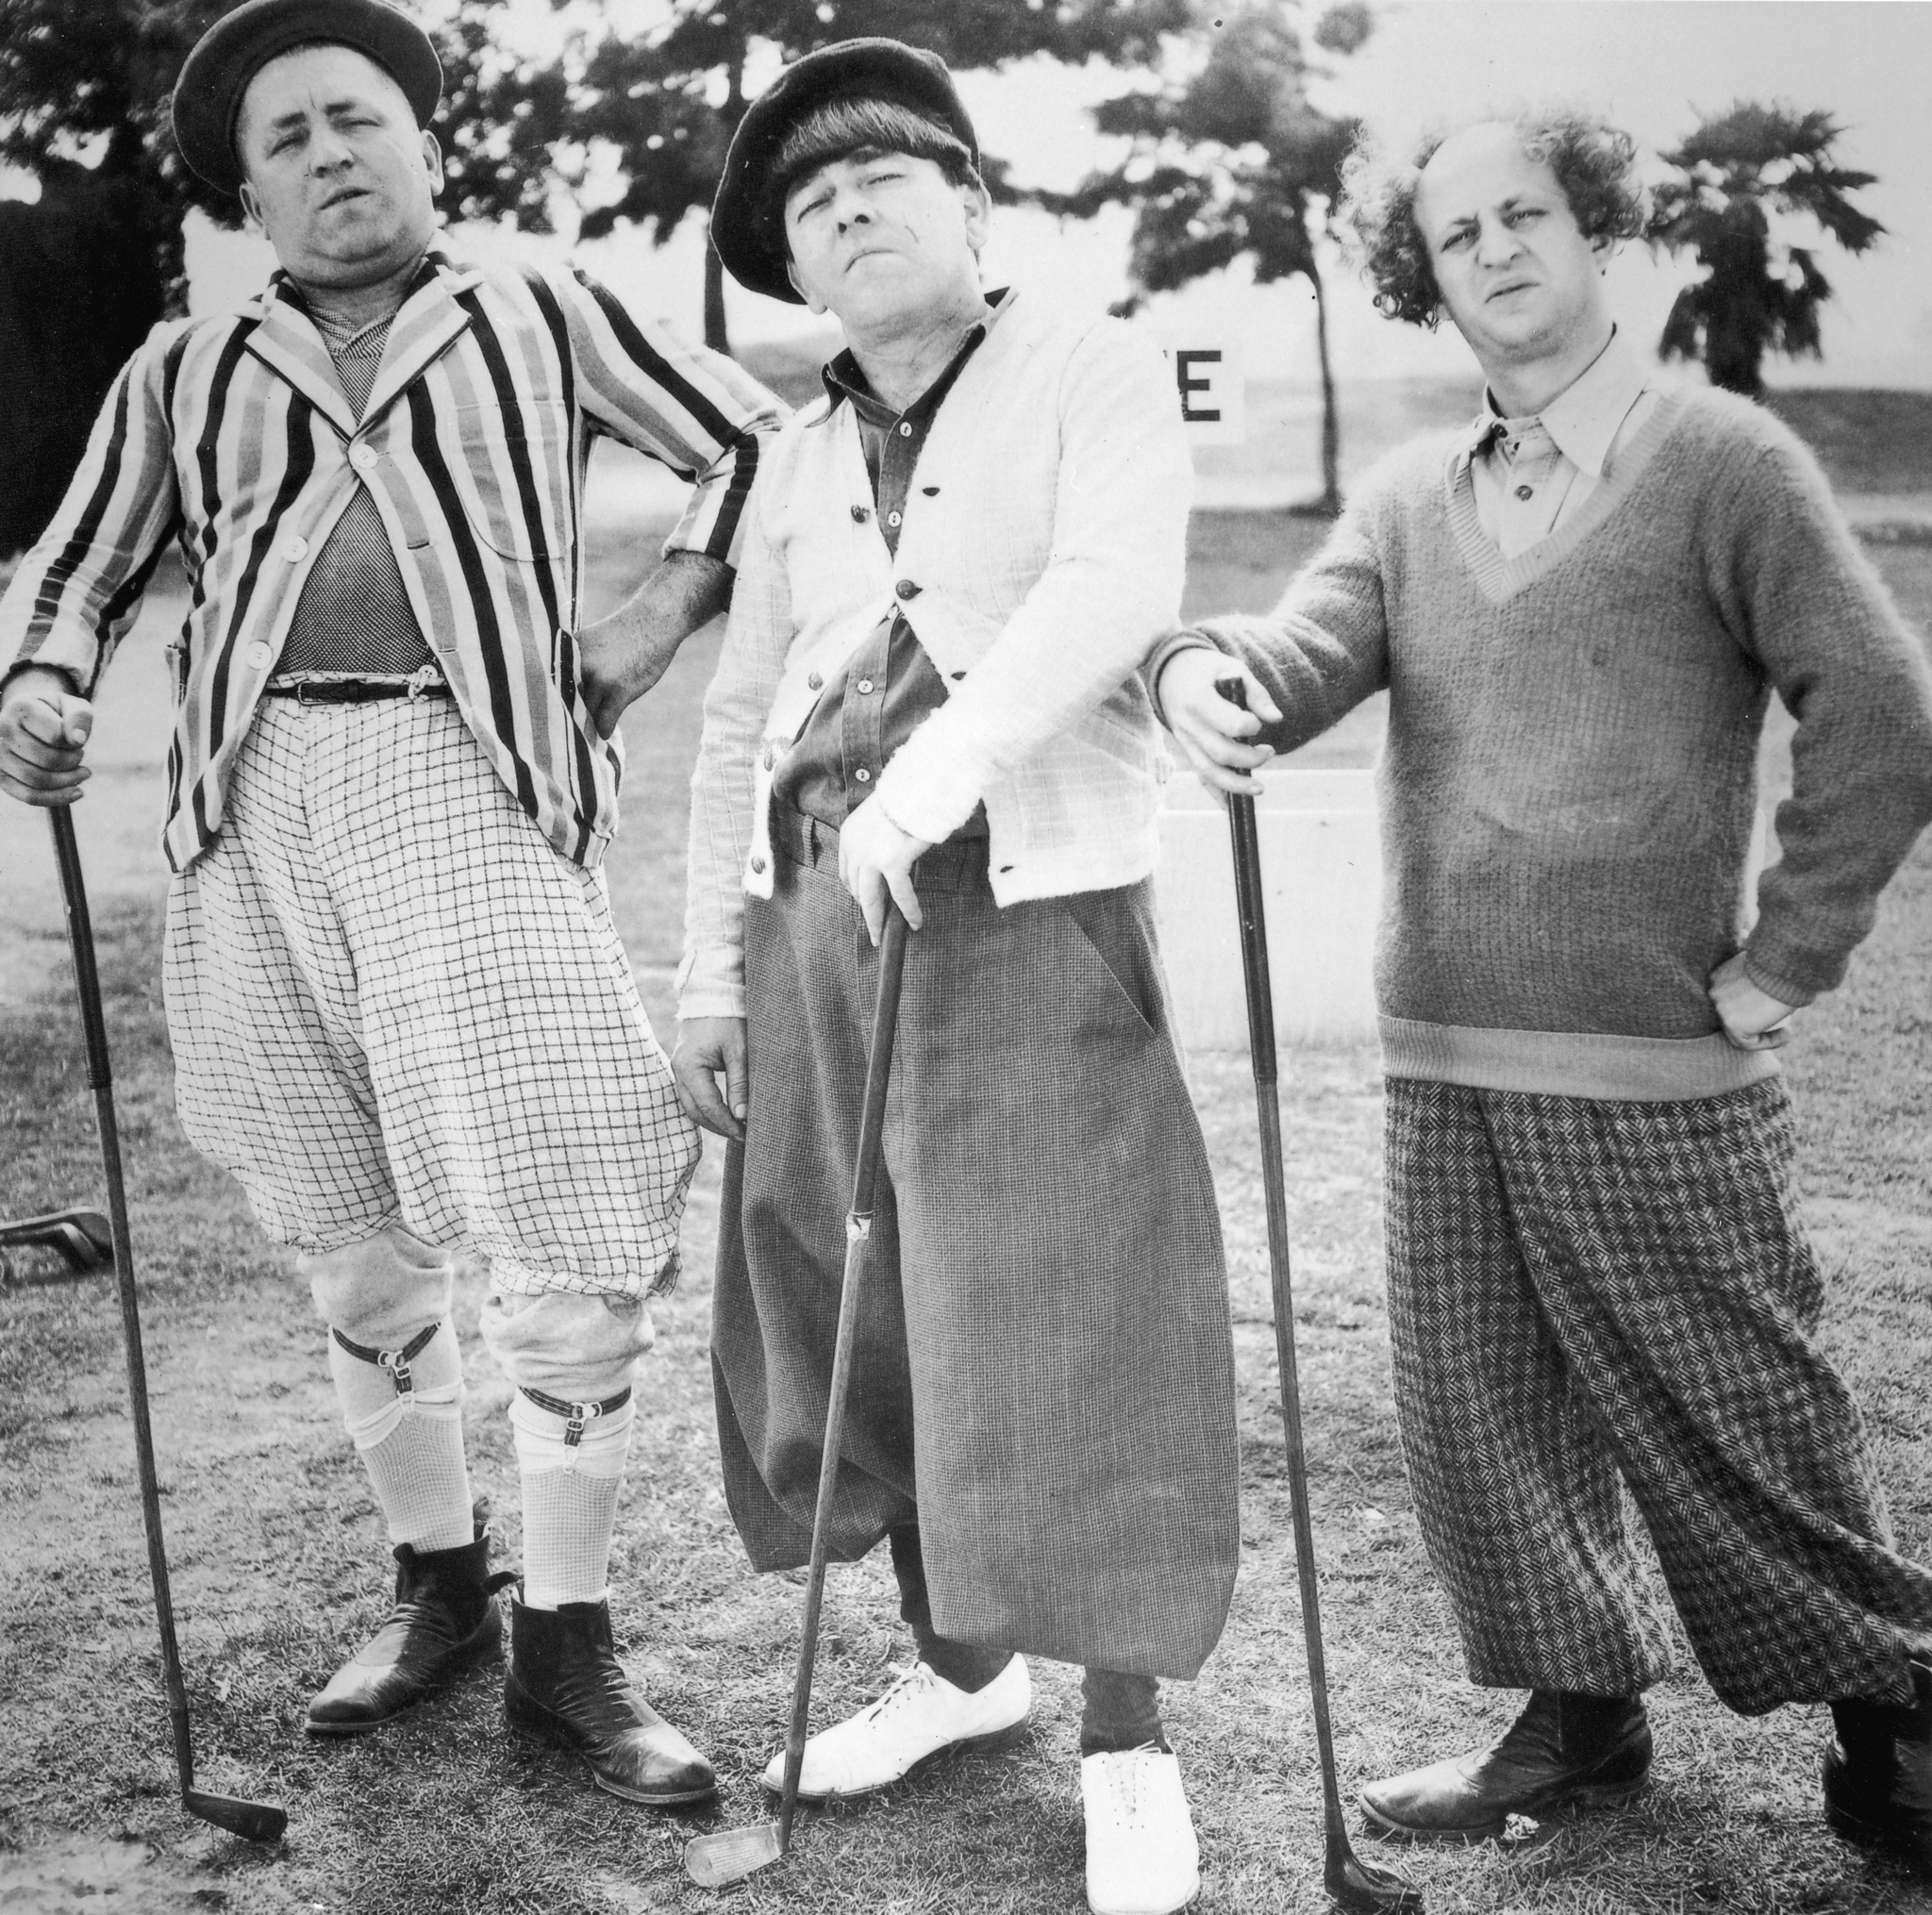 Moe Howard, Larry Fine, Curly Howard and The Three Stooges